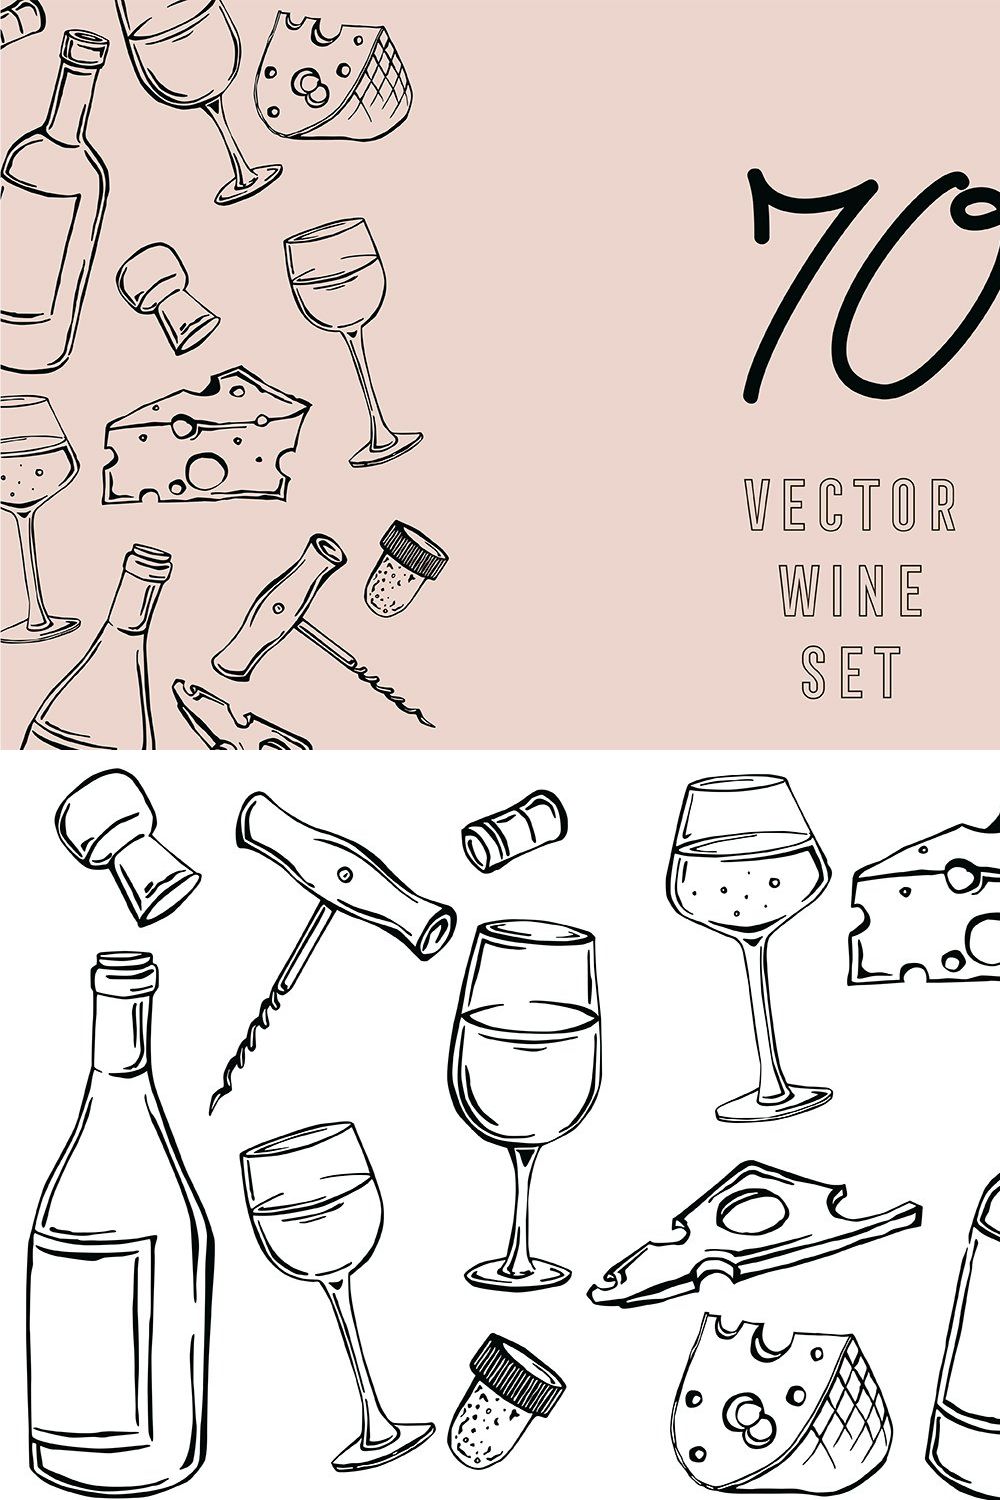 Vector wine pinterest preview image.